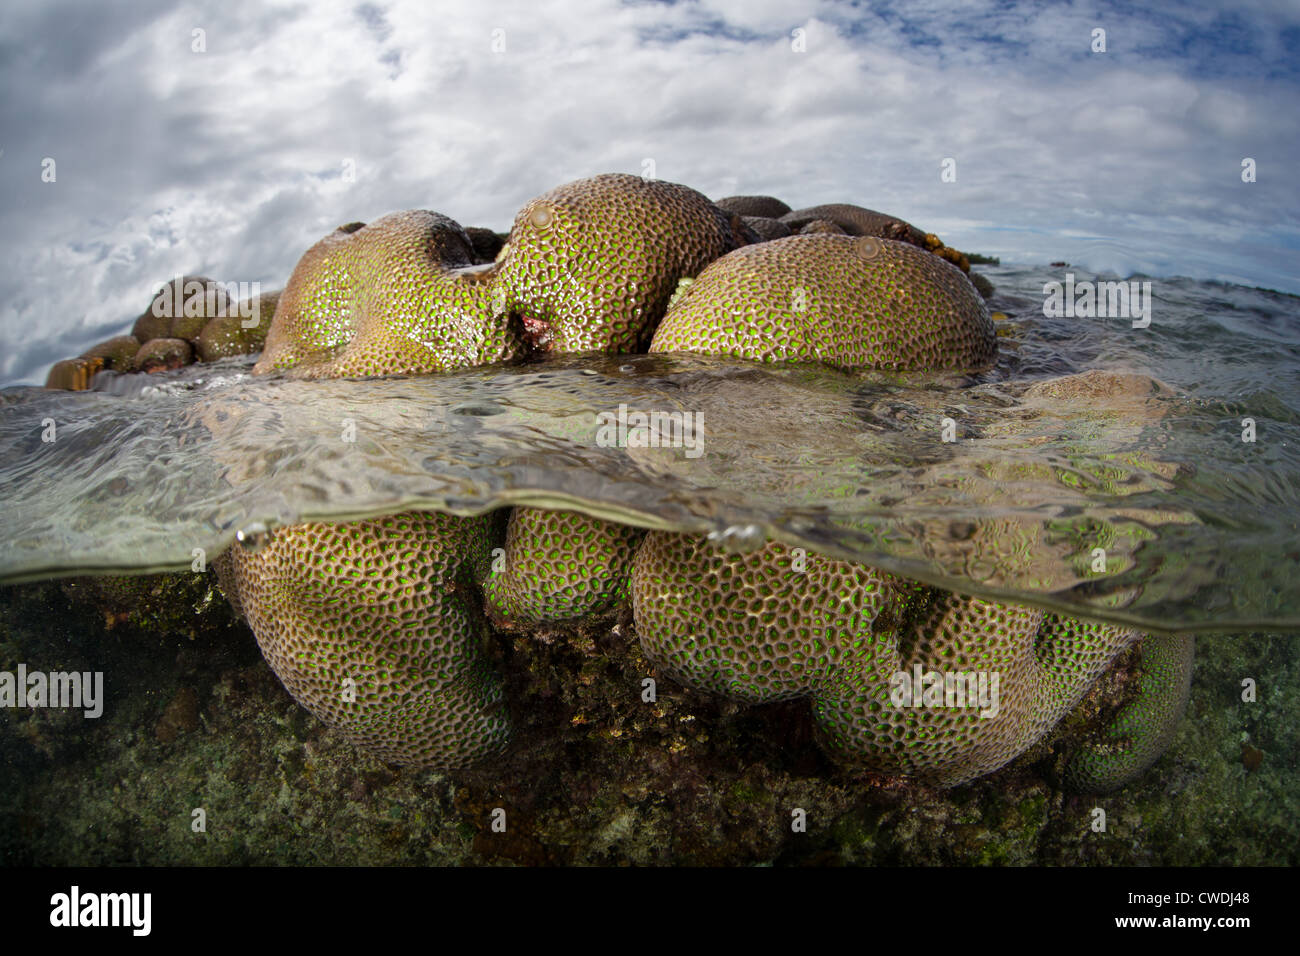 A hard coral colony, Favites sp., grows on a shallow reef exposed during a severe low tide. Stock Photo